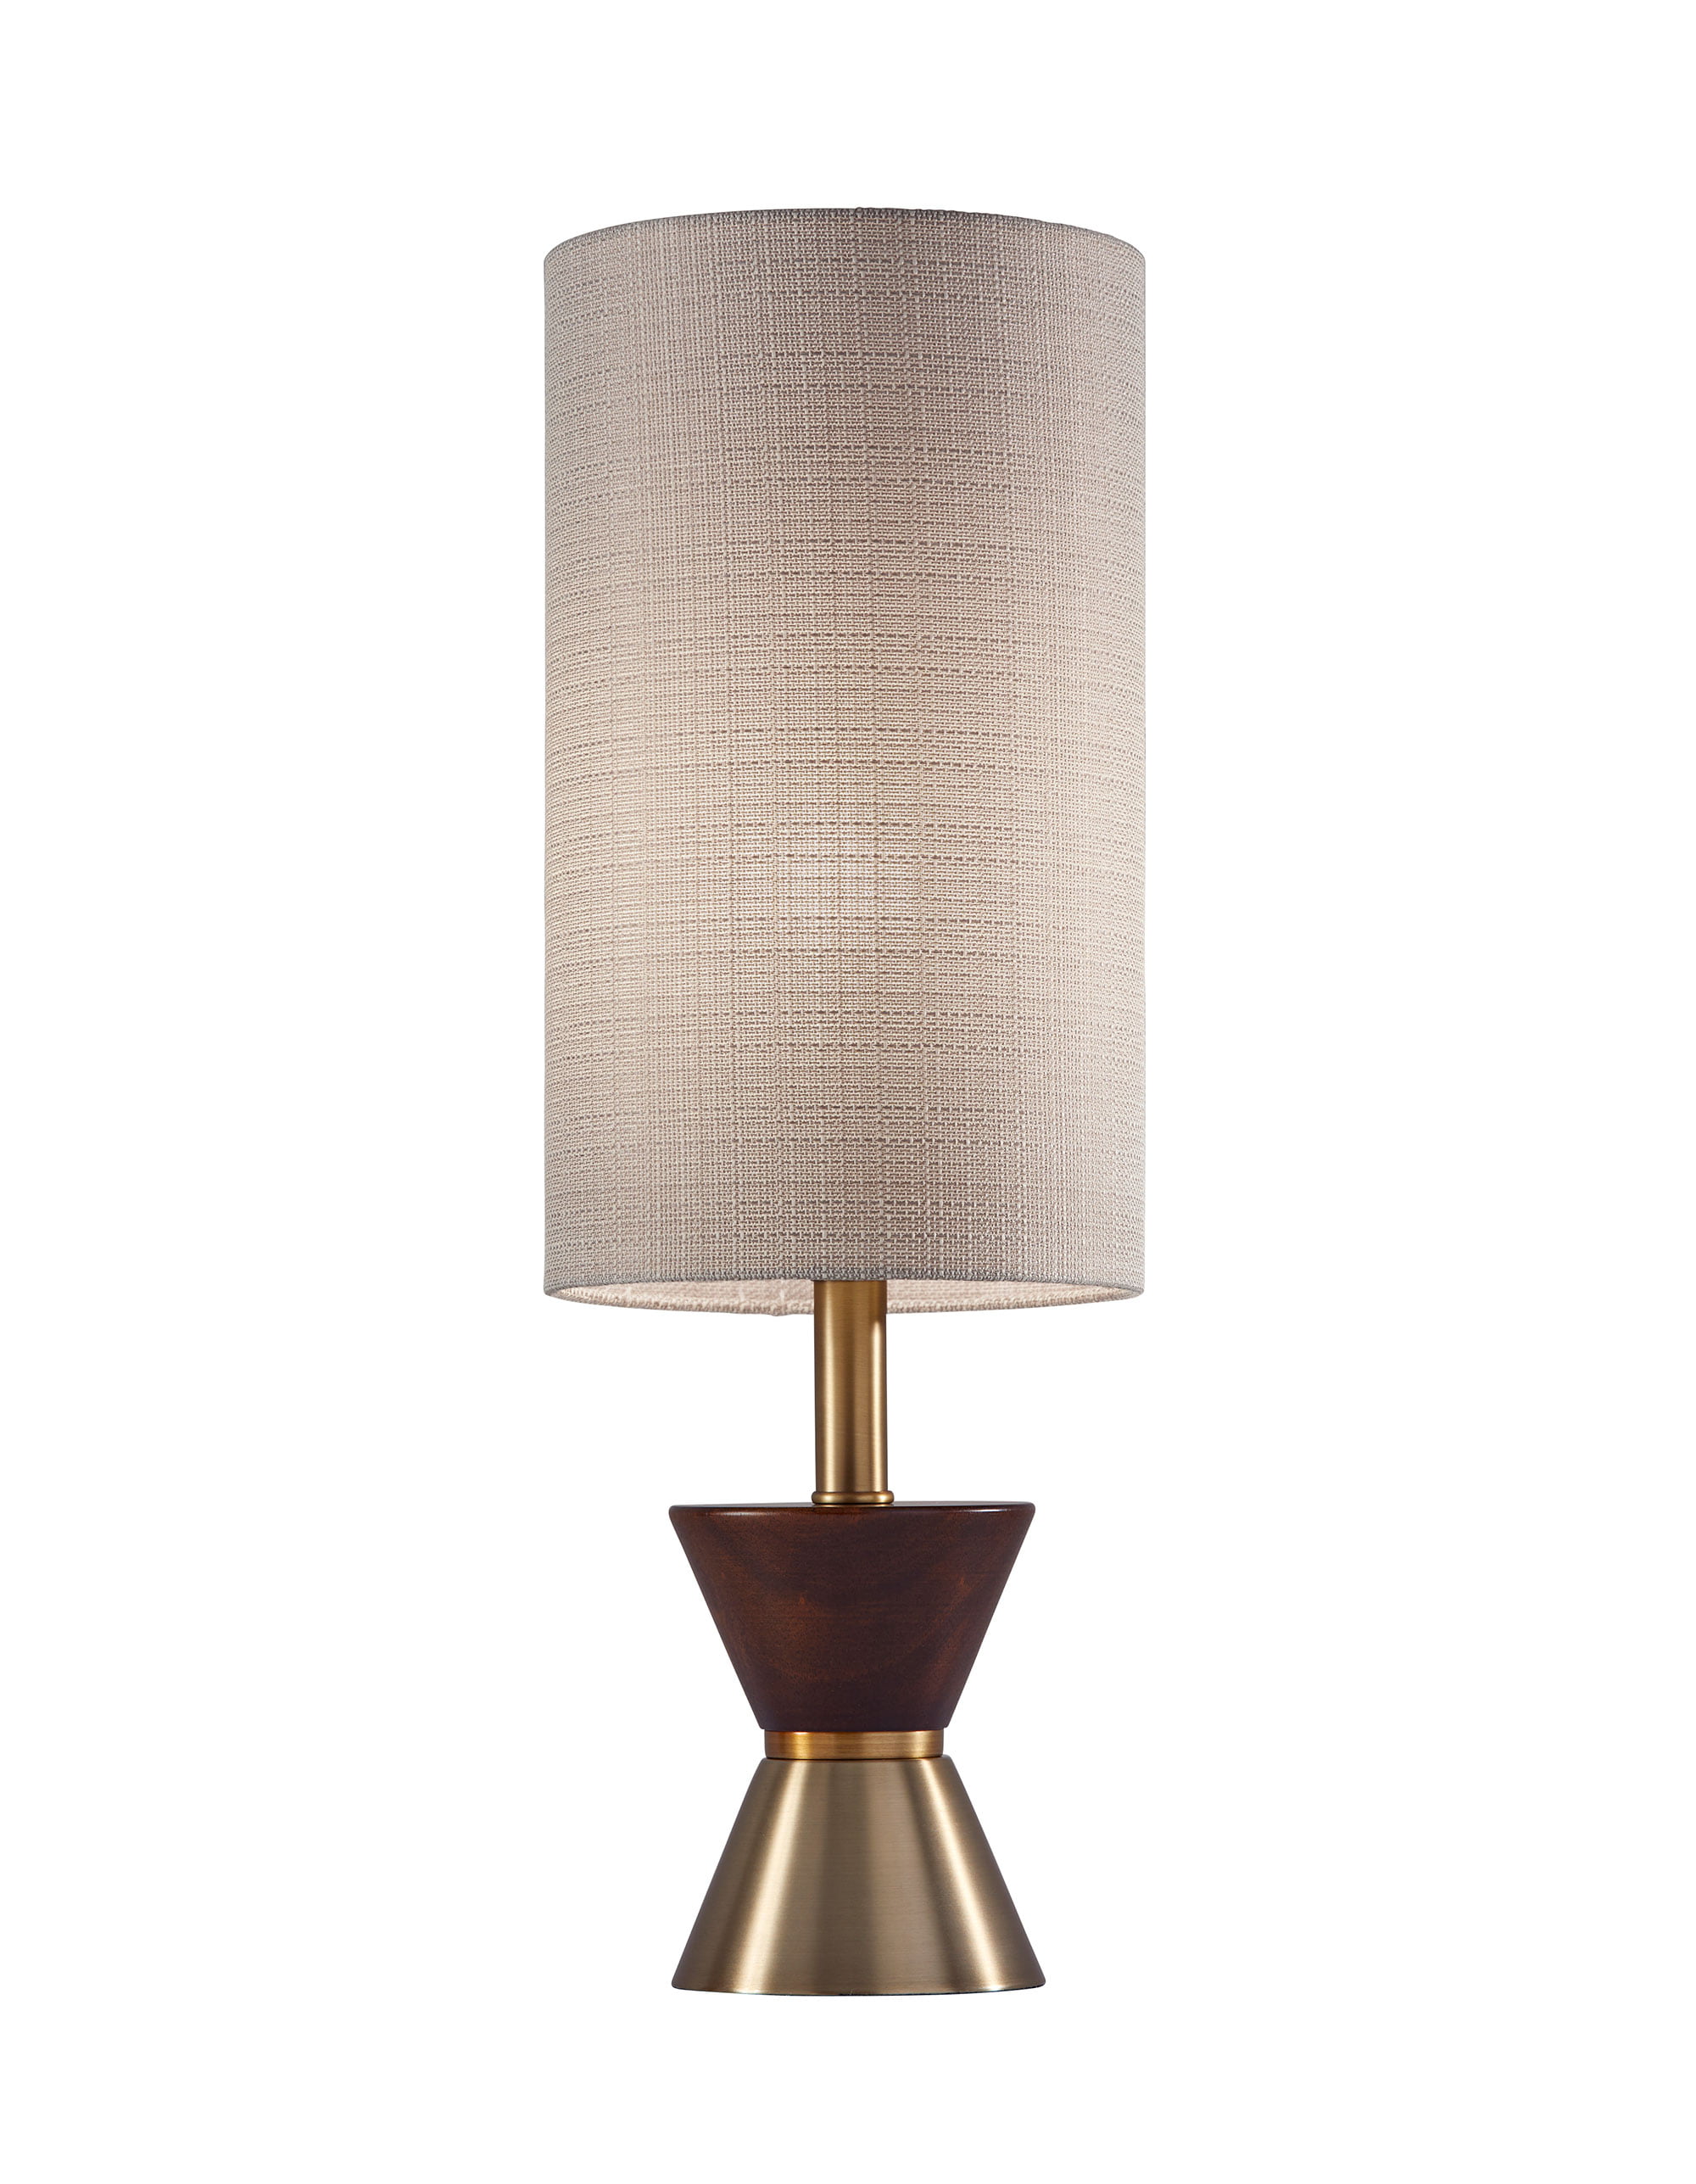 Adesso Carmen Table Lamp Antique Brass, Beige Table Lamp Textured